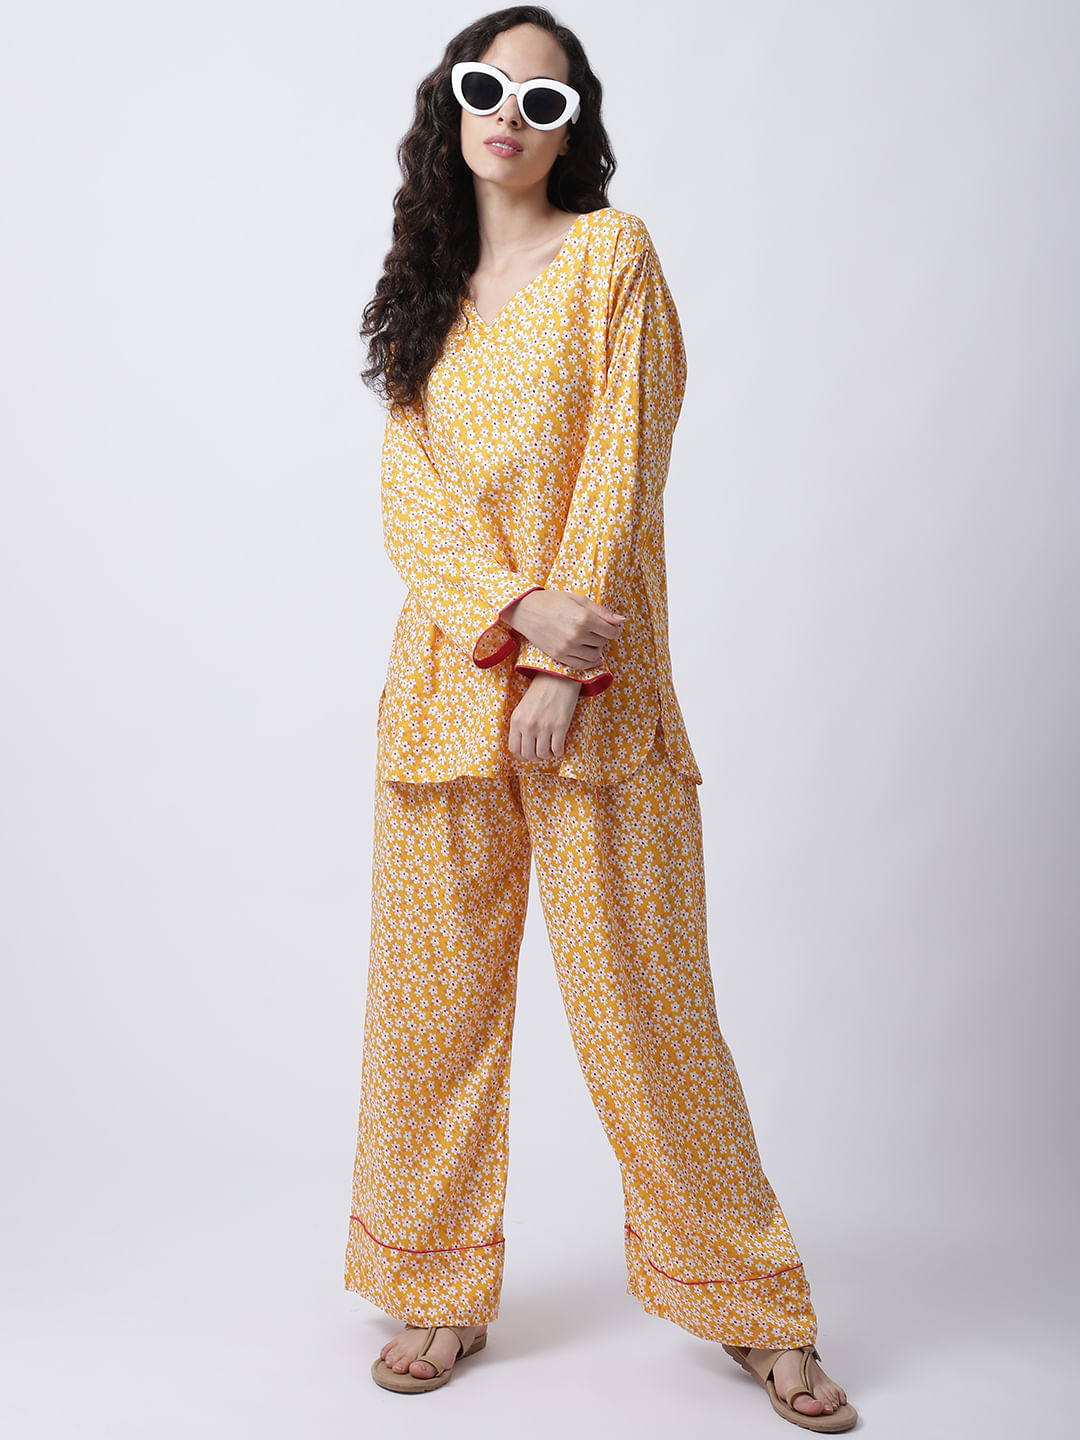 Buy Rayon Yellow Floral Printed Night Suit set of Top & Pyjama trouser for  Women at Secret Wish